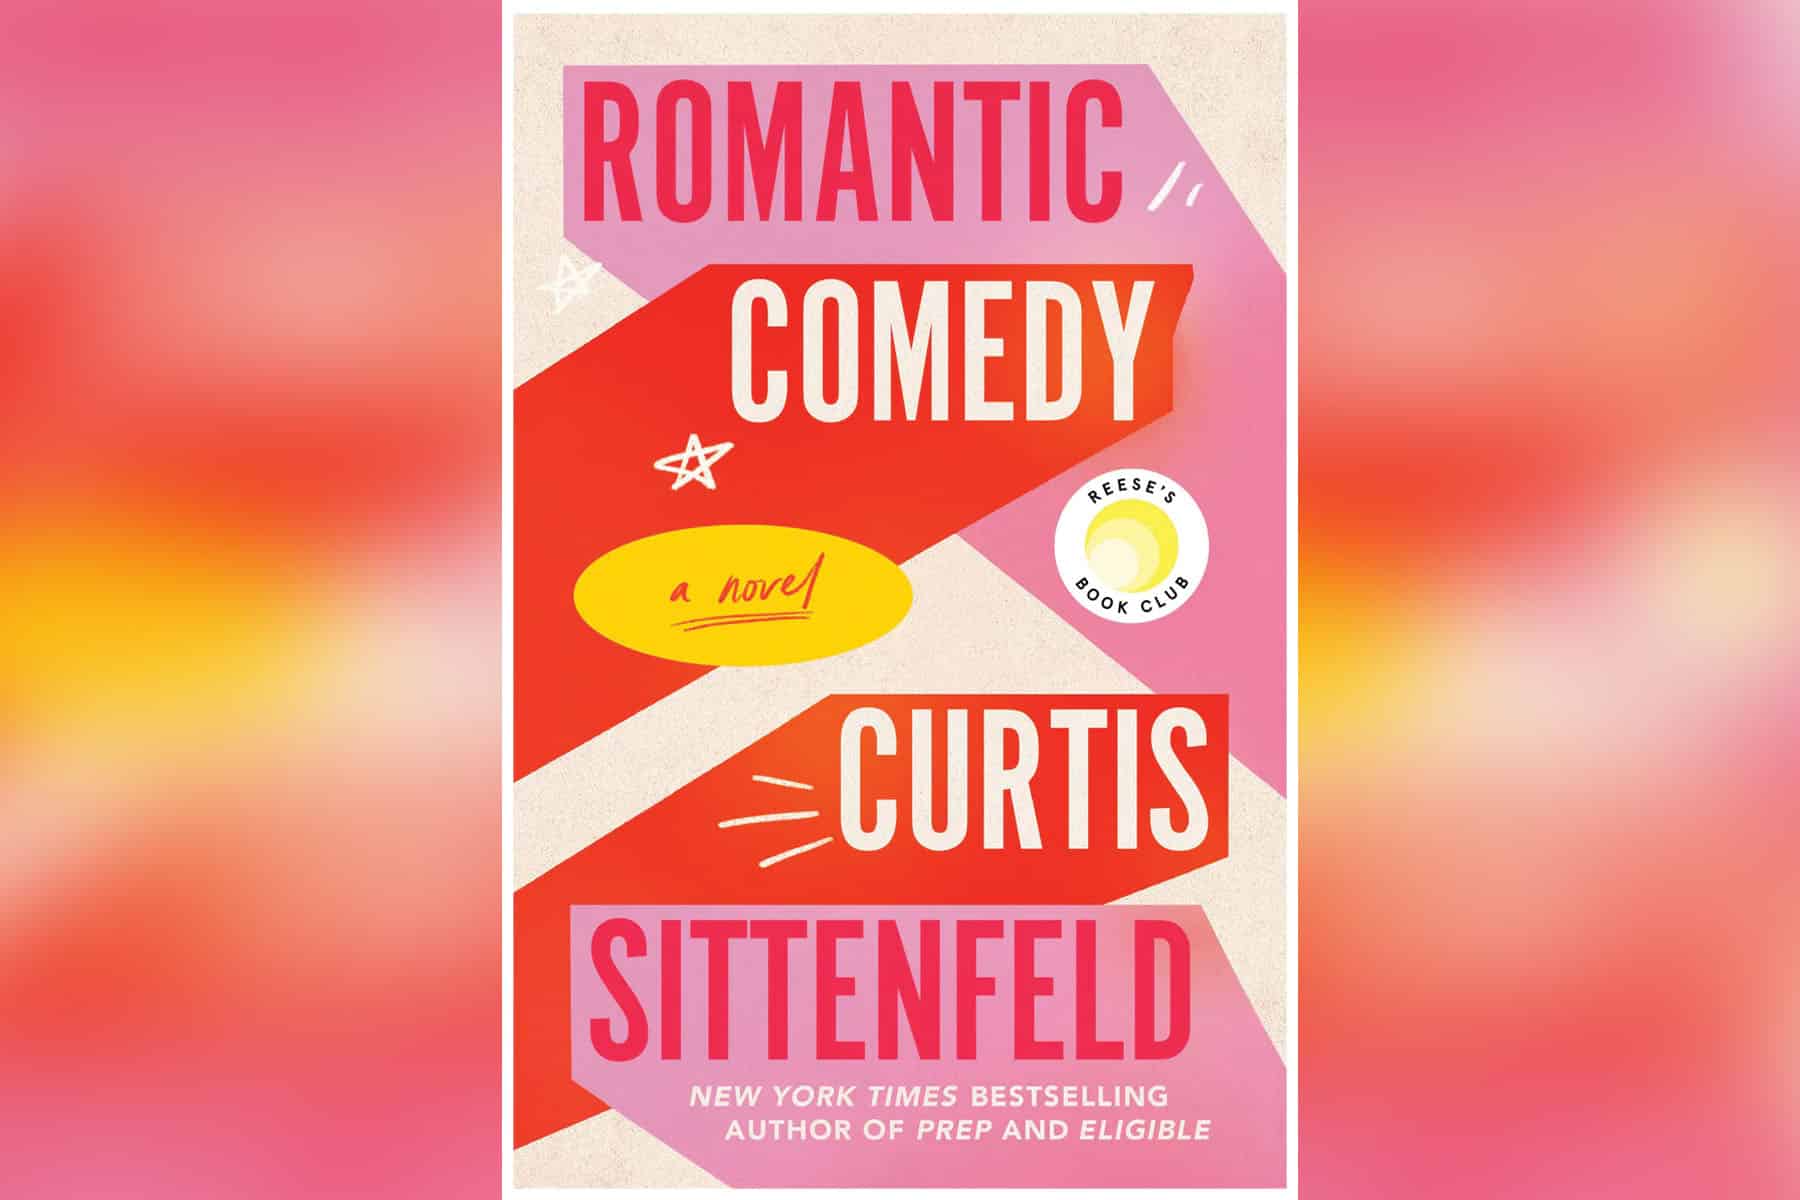 Nerdy Jews and Glamorous Gentiles A Review of Curtis Sittenfelds “Romantic Comedy” picture